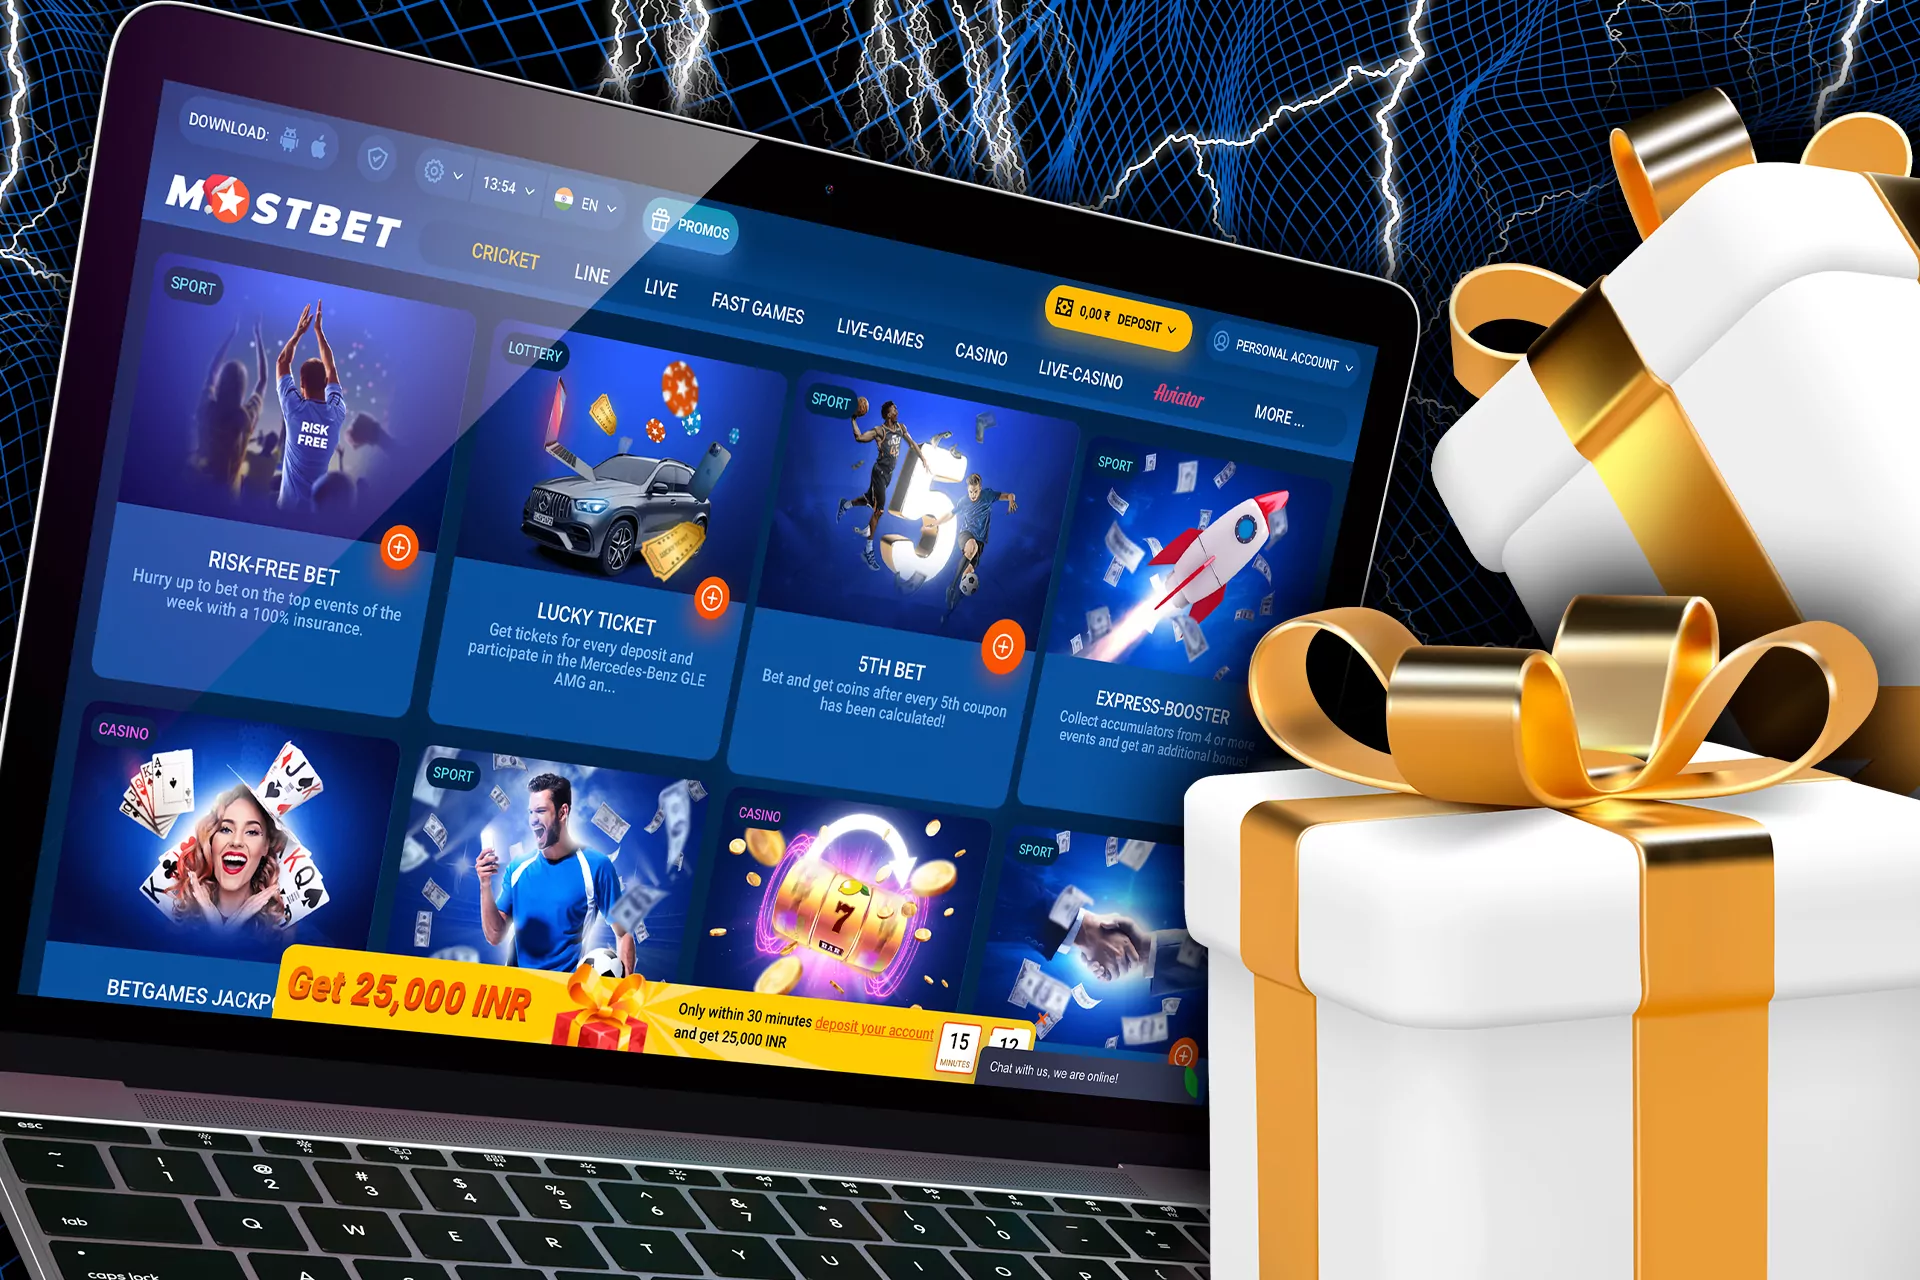 Othet types of bonuses and loyalty programs at Mostbet for indian players.